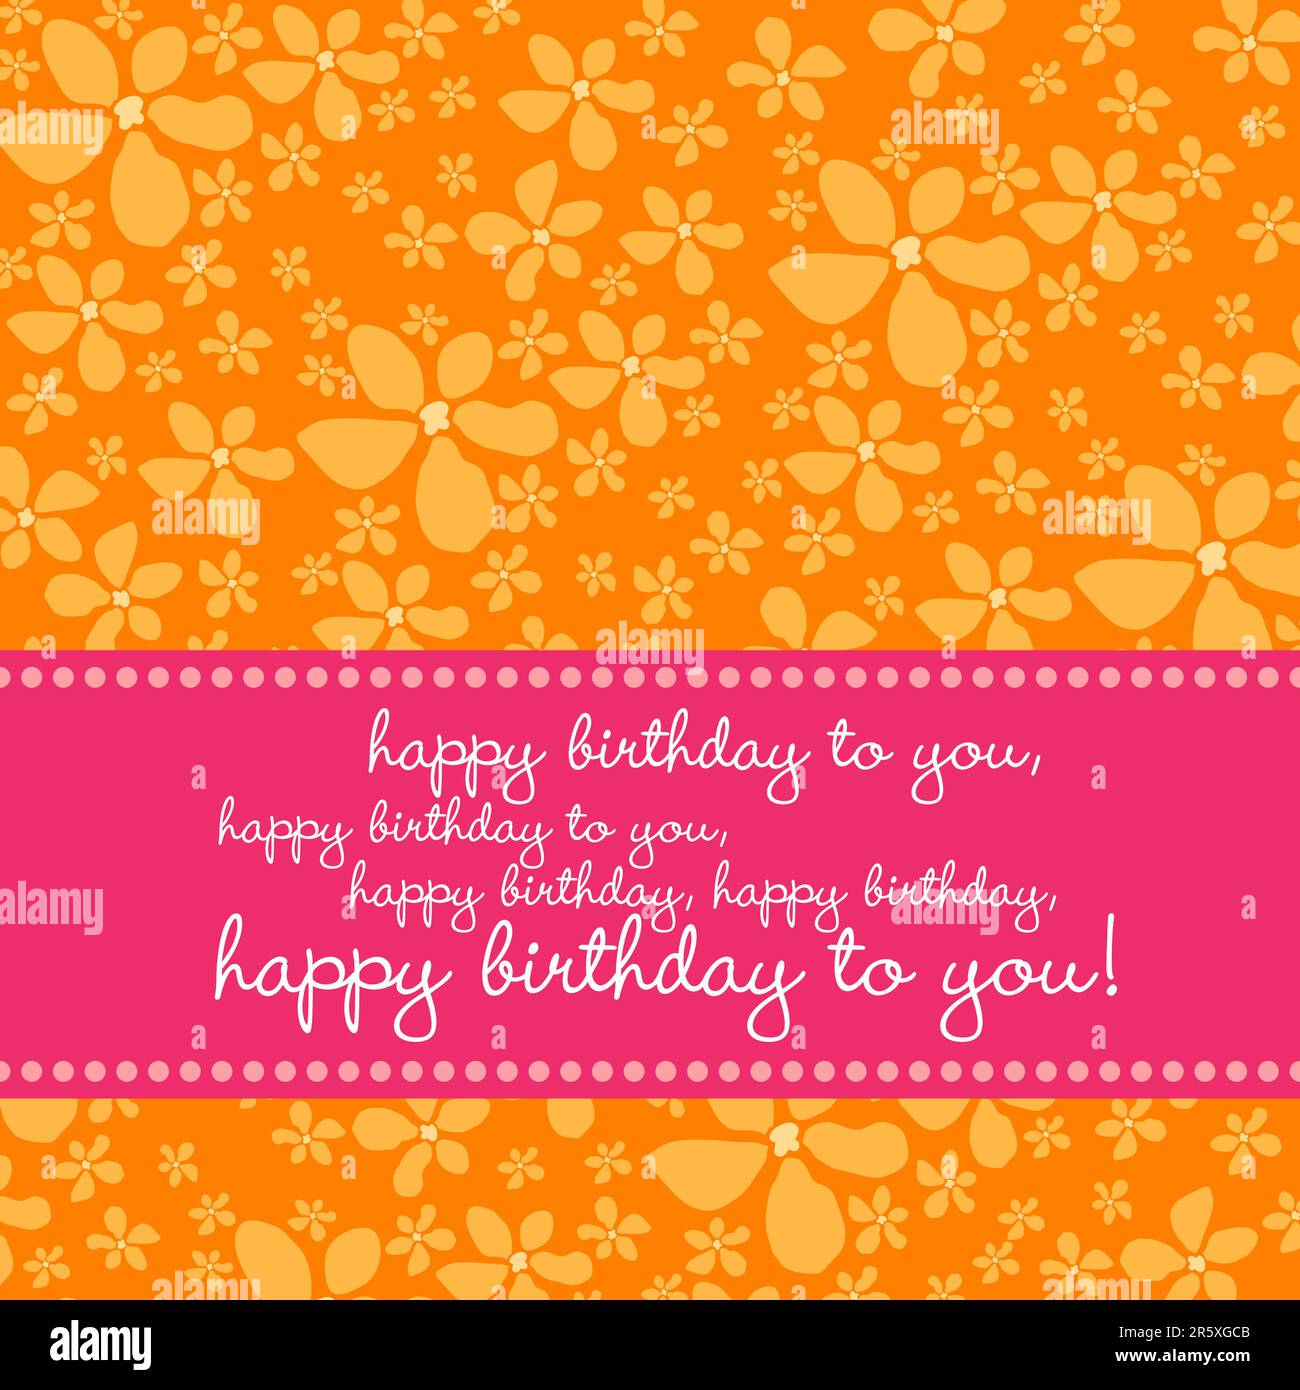 Bright colored birthday greetingcard with retro flower pattern in pink, orange, white. Stock Vector